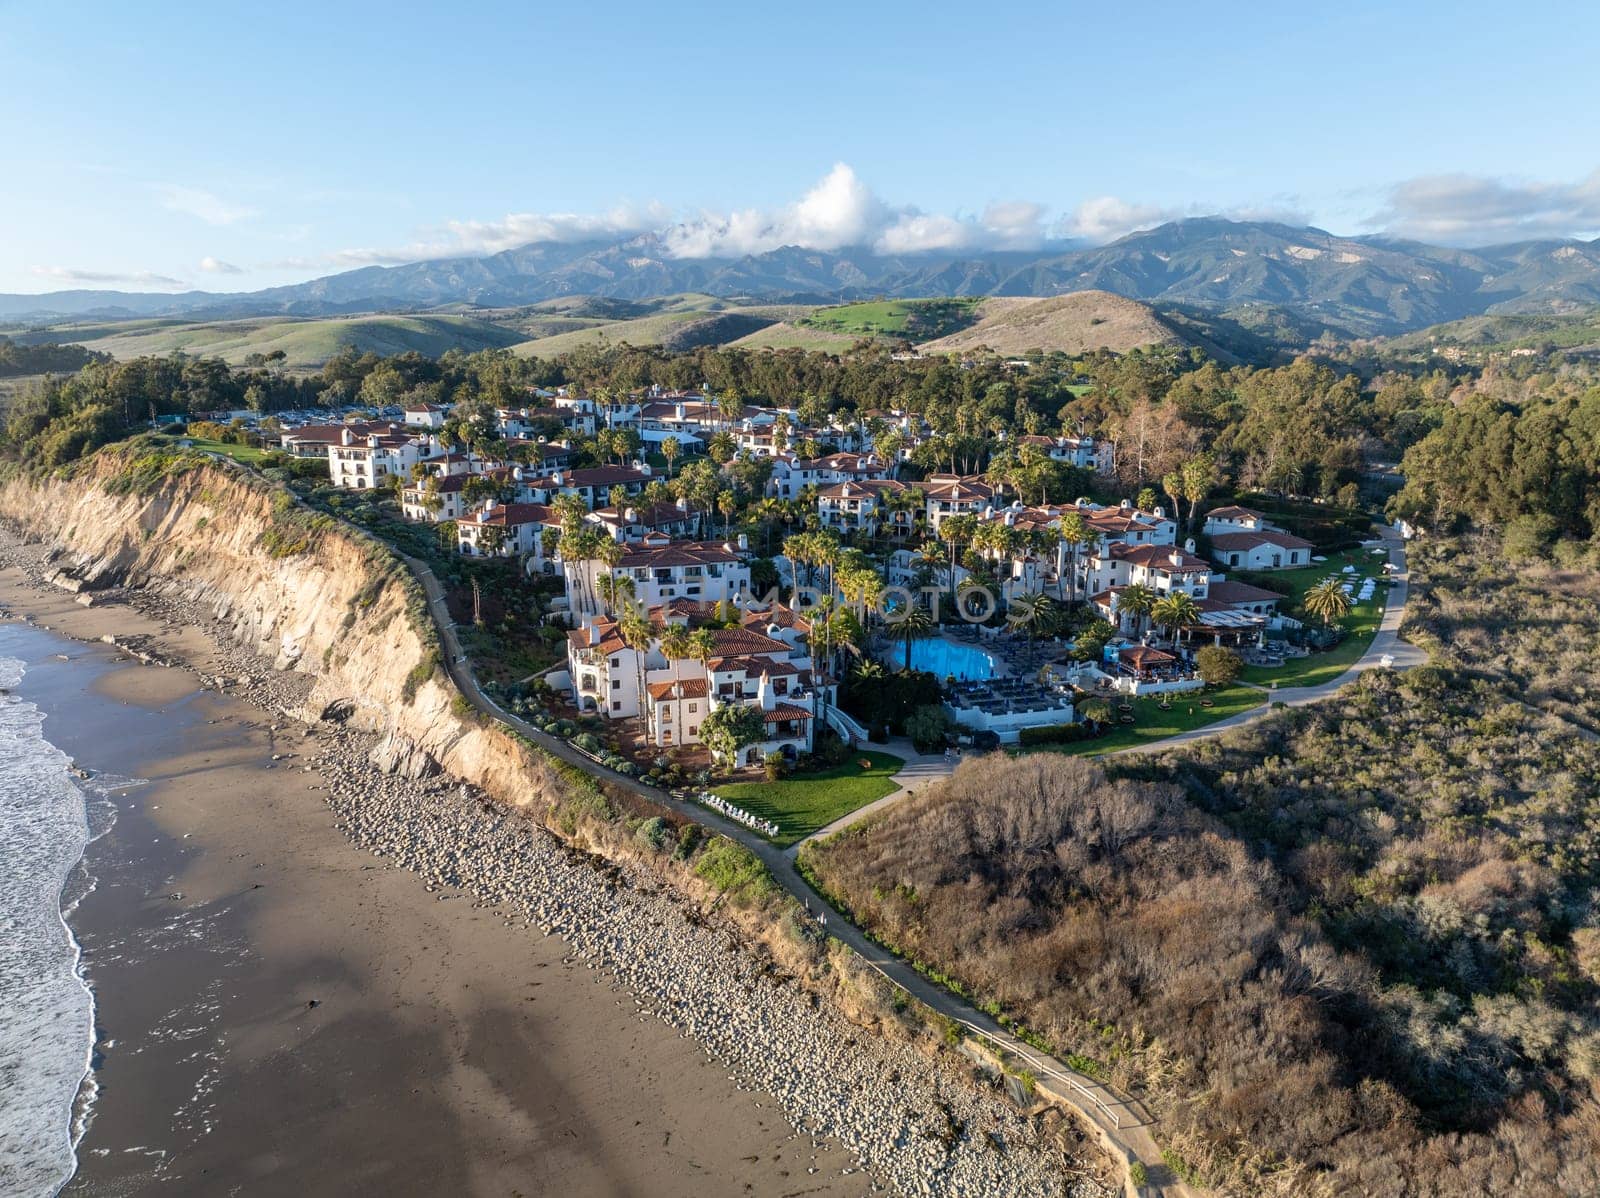 Aerial view of the cliff and beach with ocean in Santa Barbara California, USA